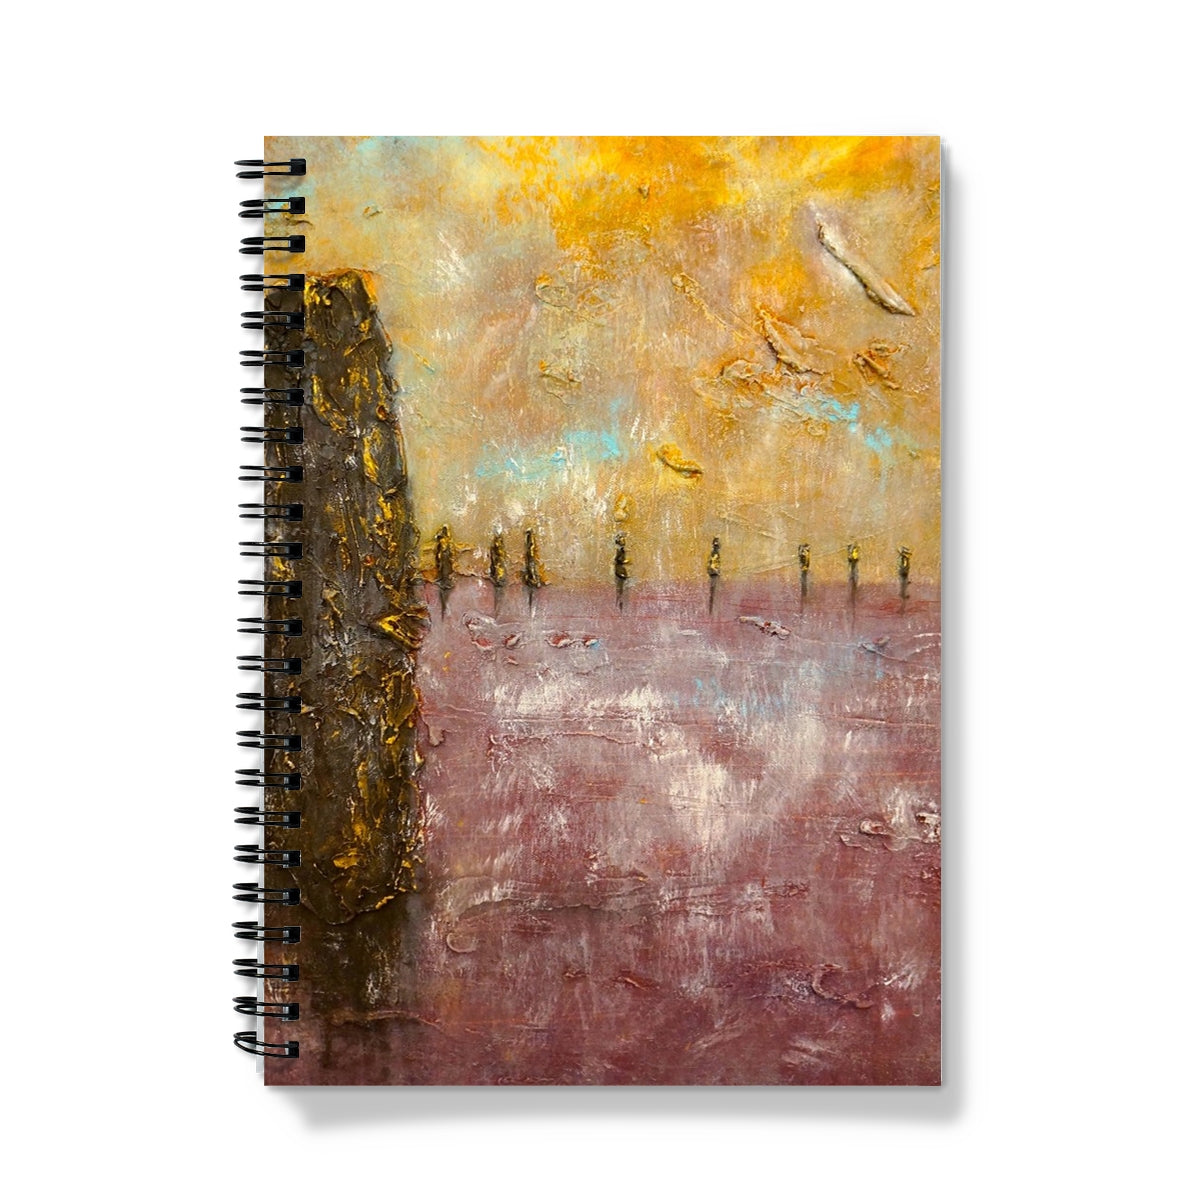 Brodgar Mist Orkney Art Gifts Notebook-Journals & Notebooks-Orkney Art Gallery-A4-Lined-Paintings, Prints, Homeware, Art Gifts From Scotland By Scottish Artist Kevin Hunter